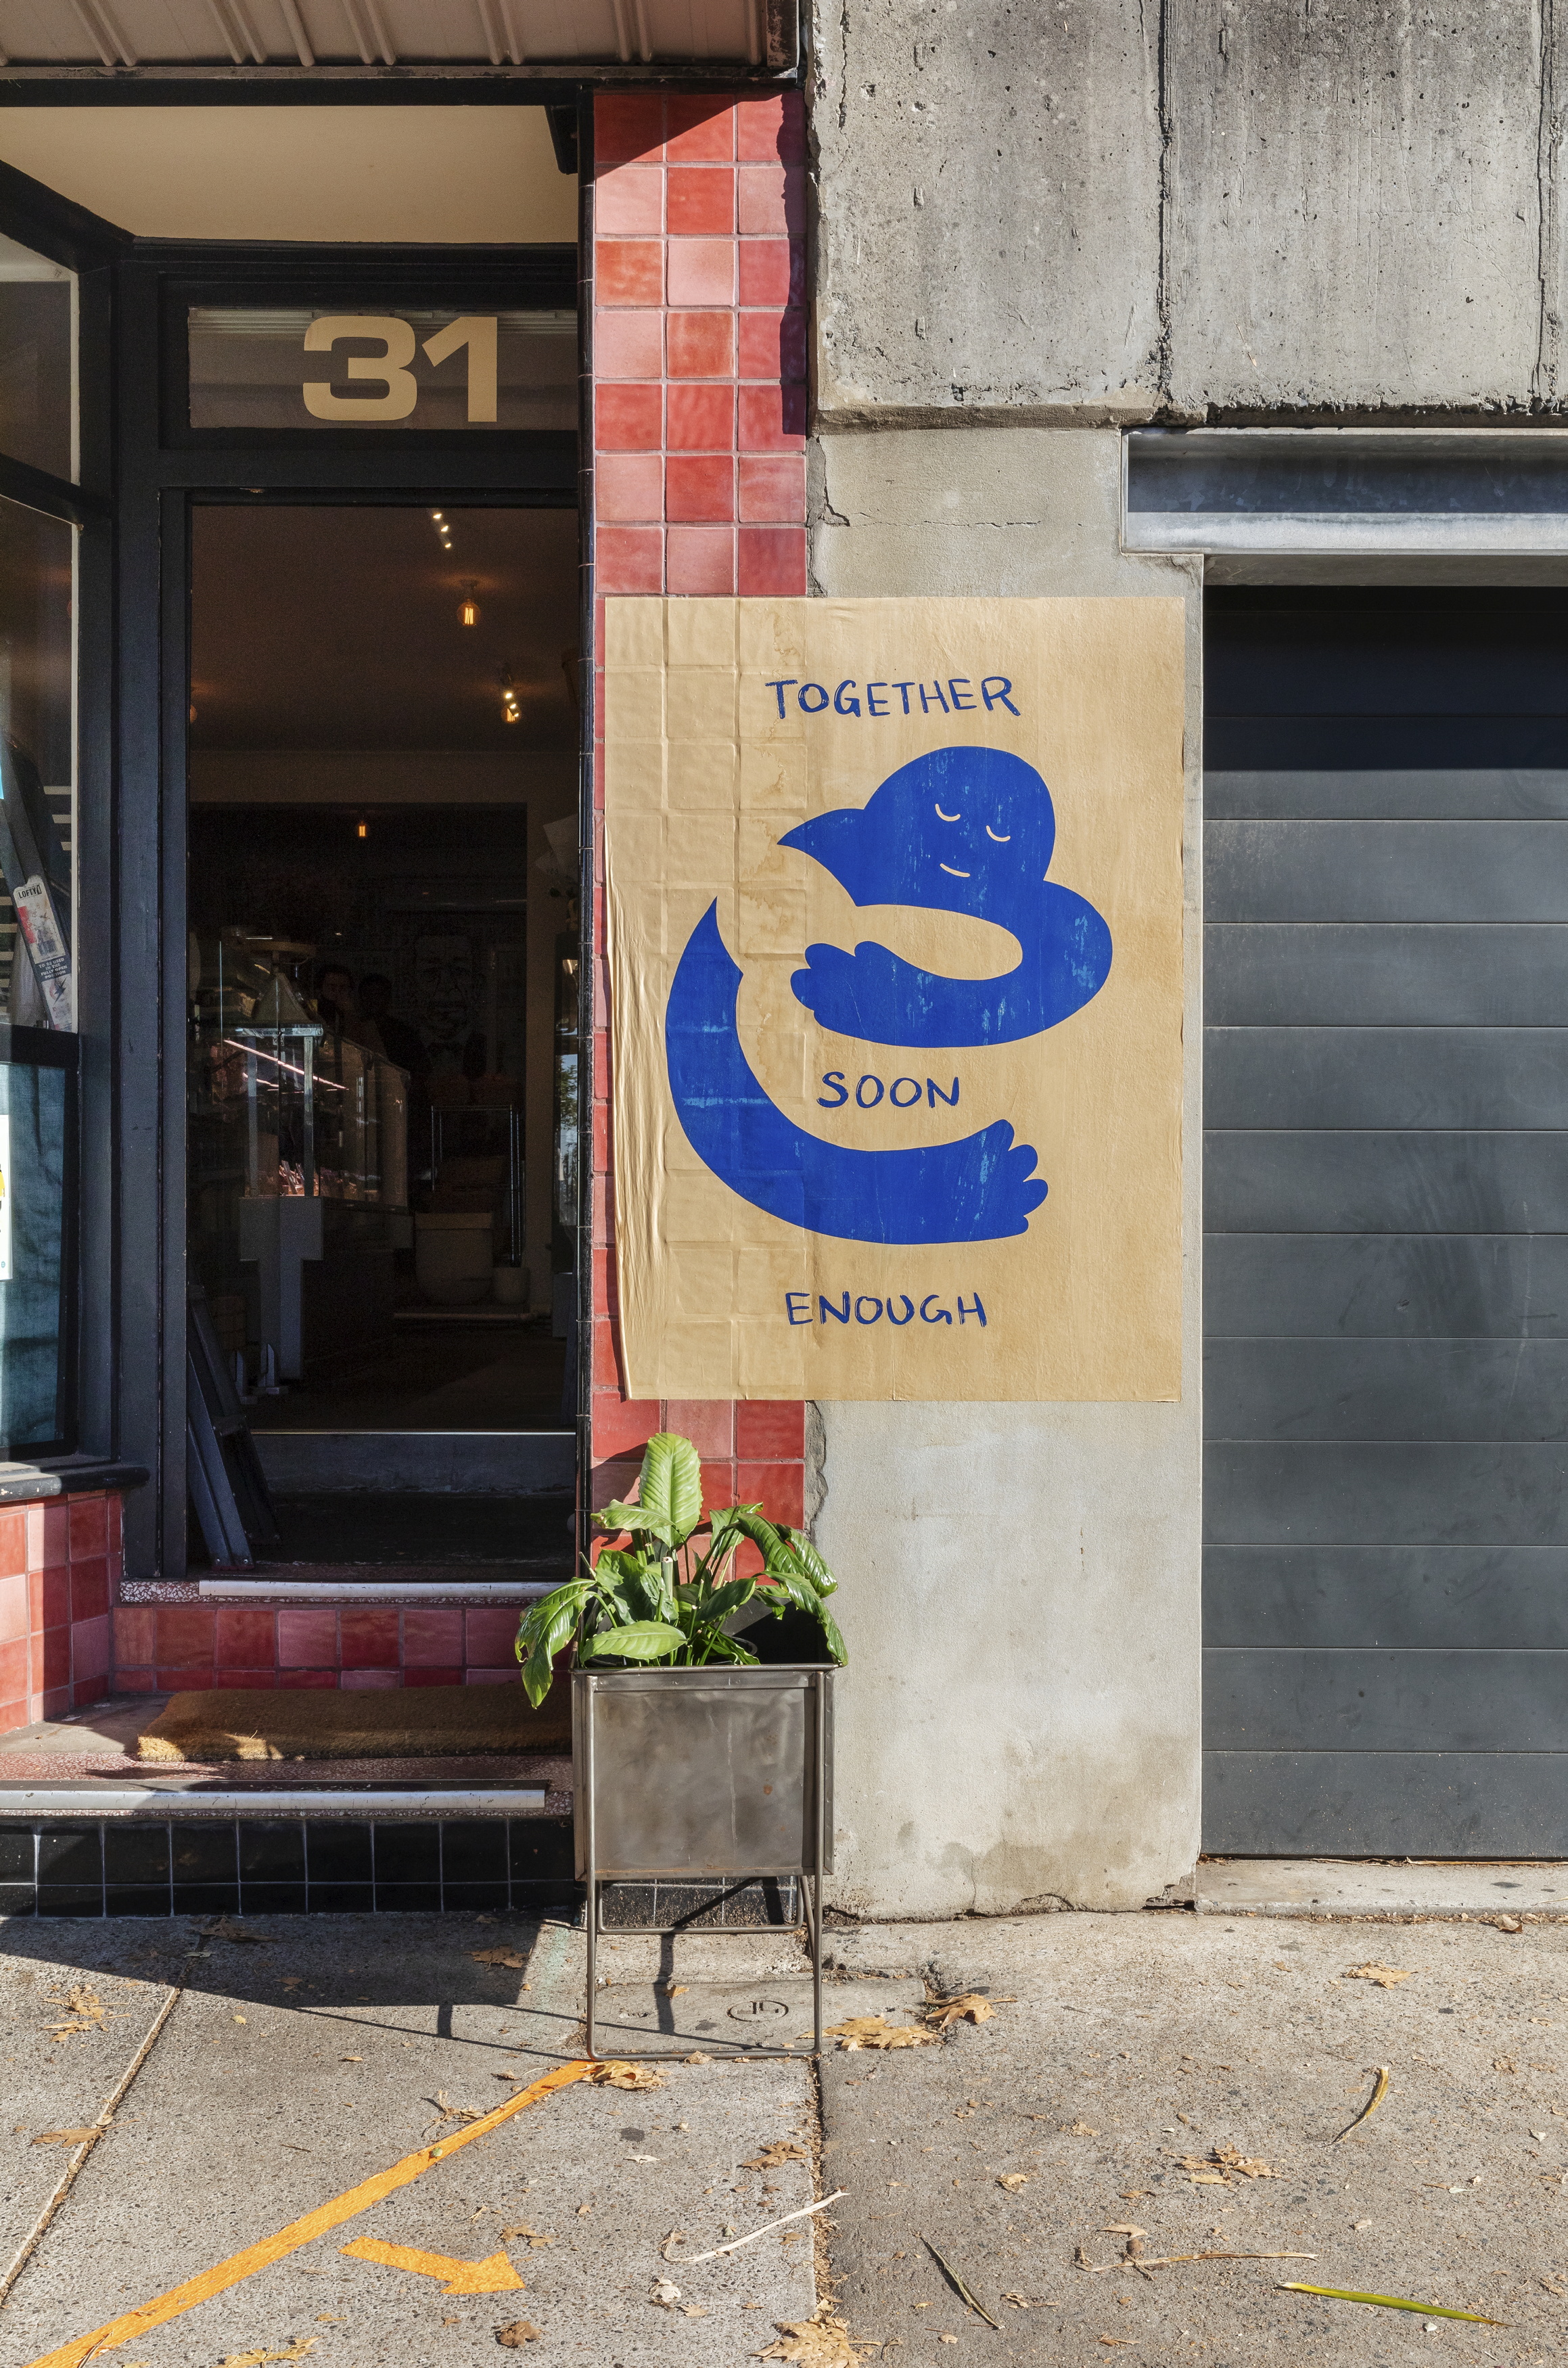 Digital photograph 'Omeio Deli, MacDonald St, Paddington showing Peter Drew’s ‘Together Soon Enough’ print, 28 May 2020' by Katherine Lu